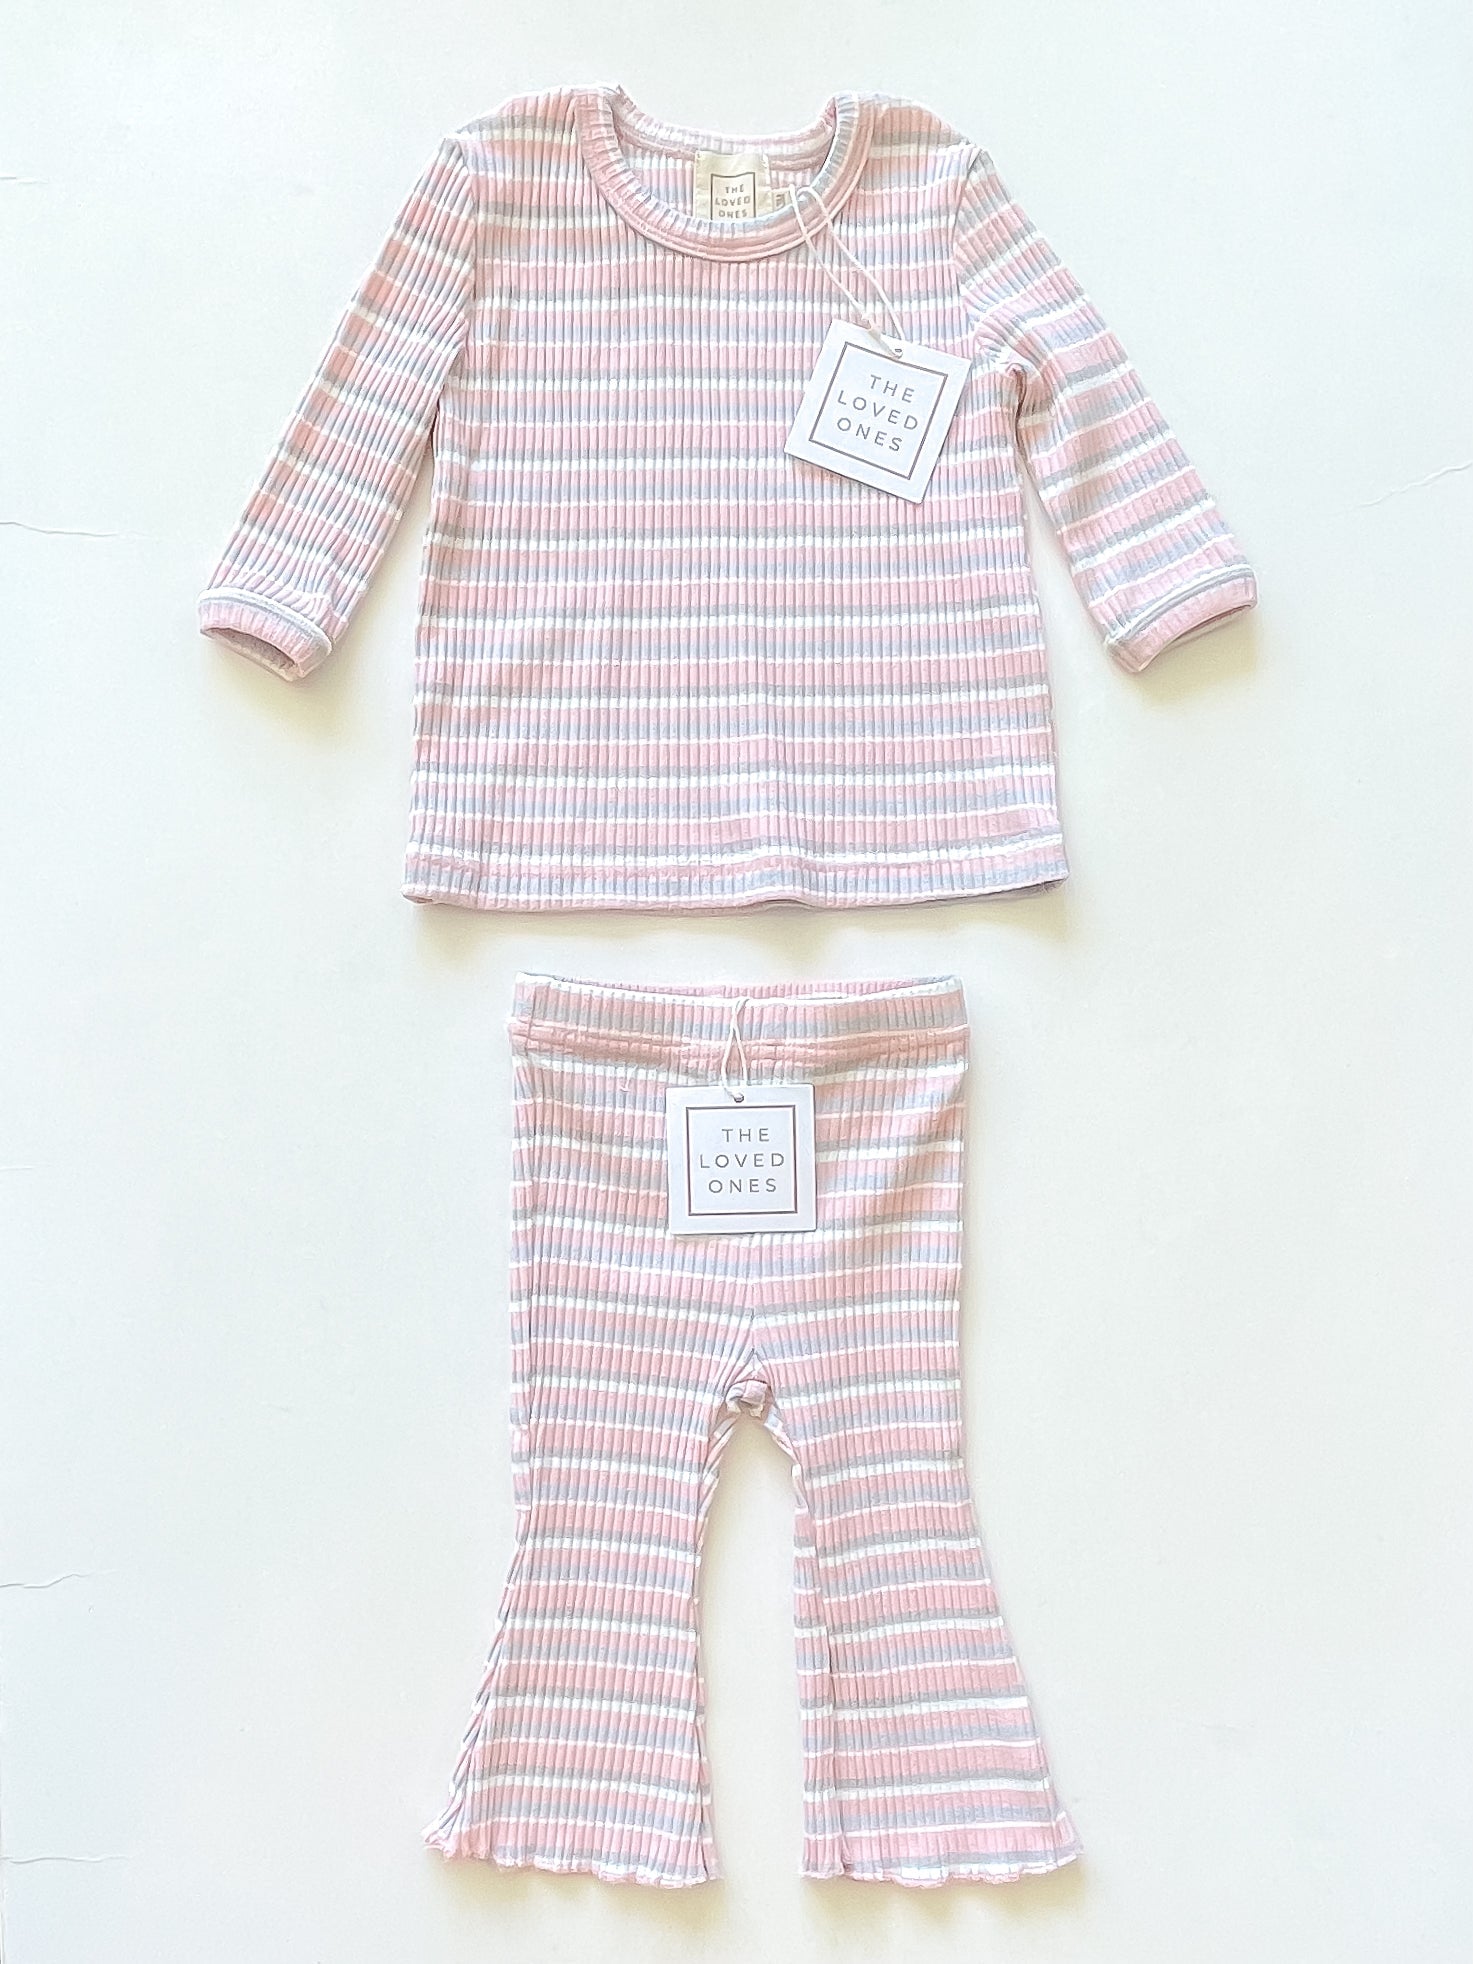 BNWT The Loved Ones ribbed set (0-3m)